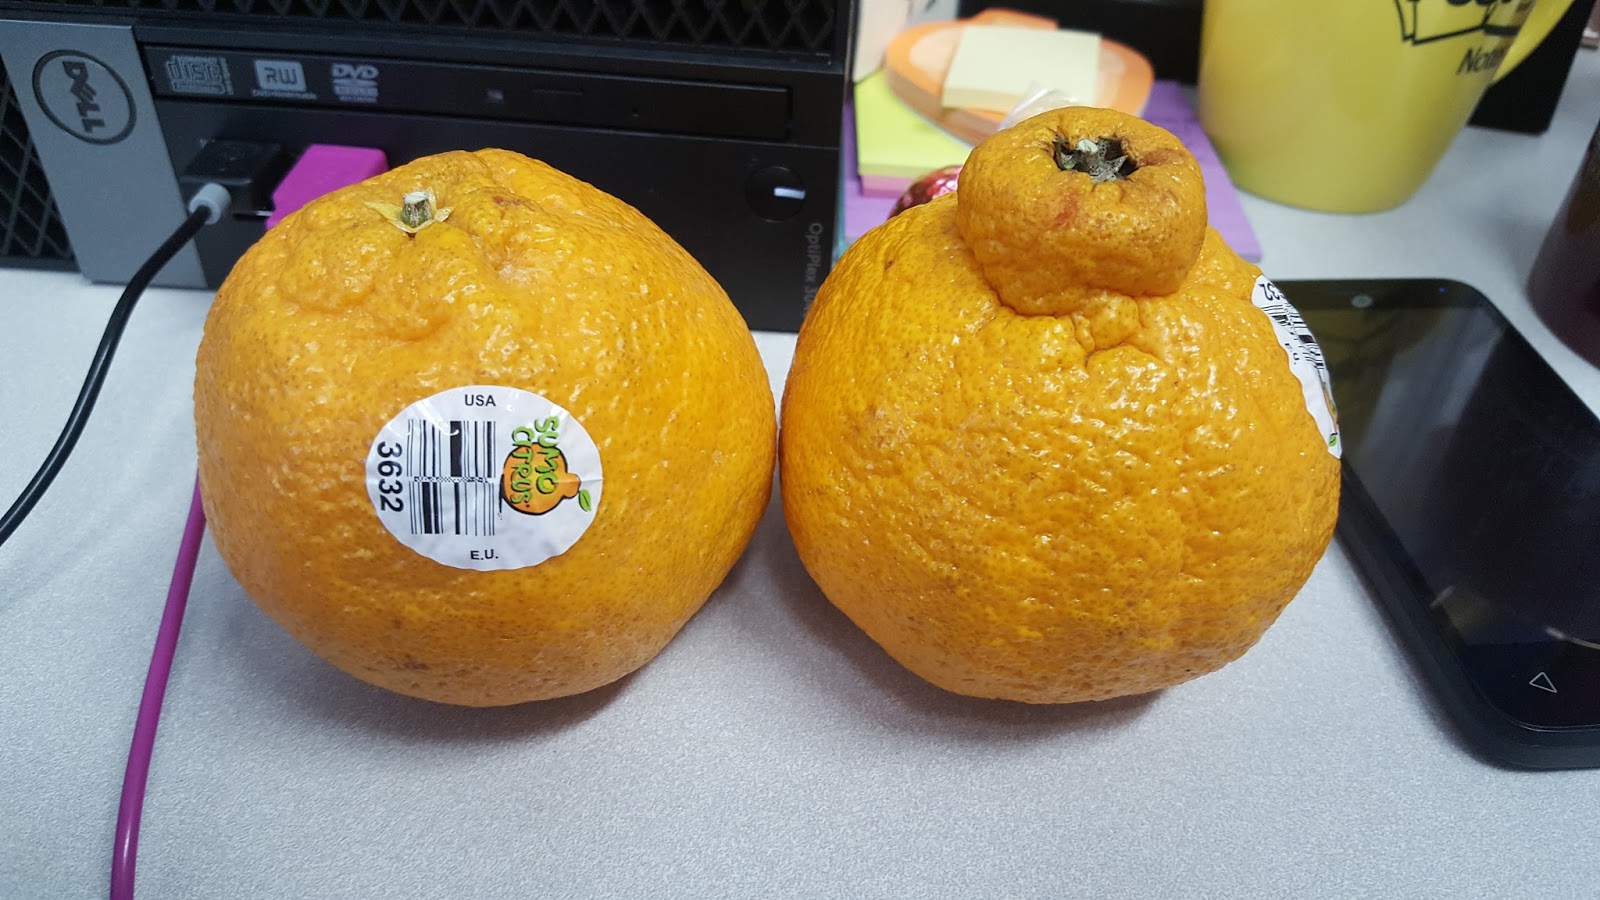 There's A New Citrus in Town — and It's a Sumo